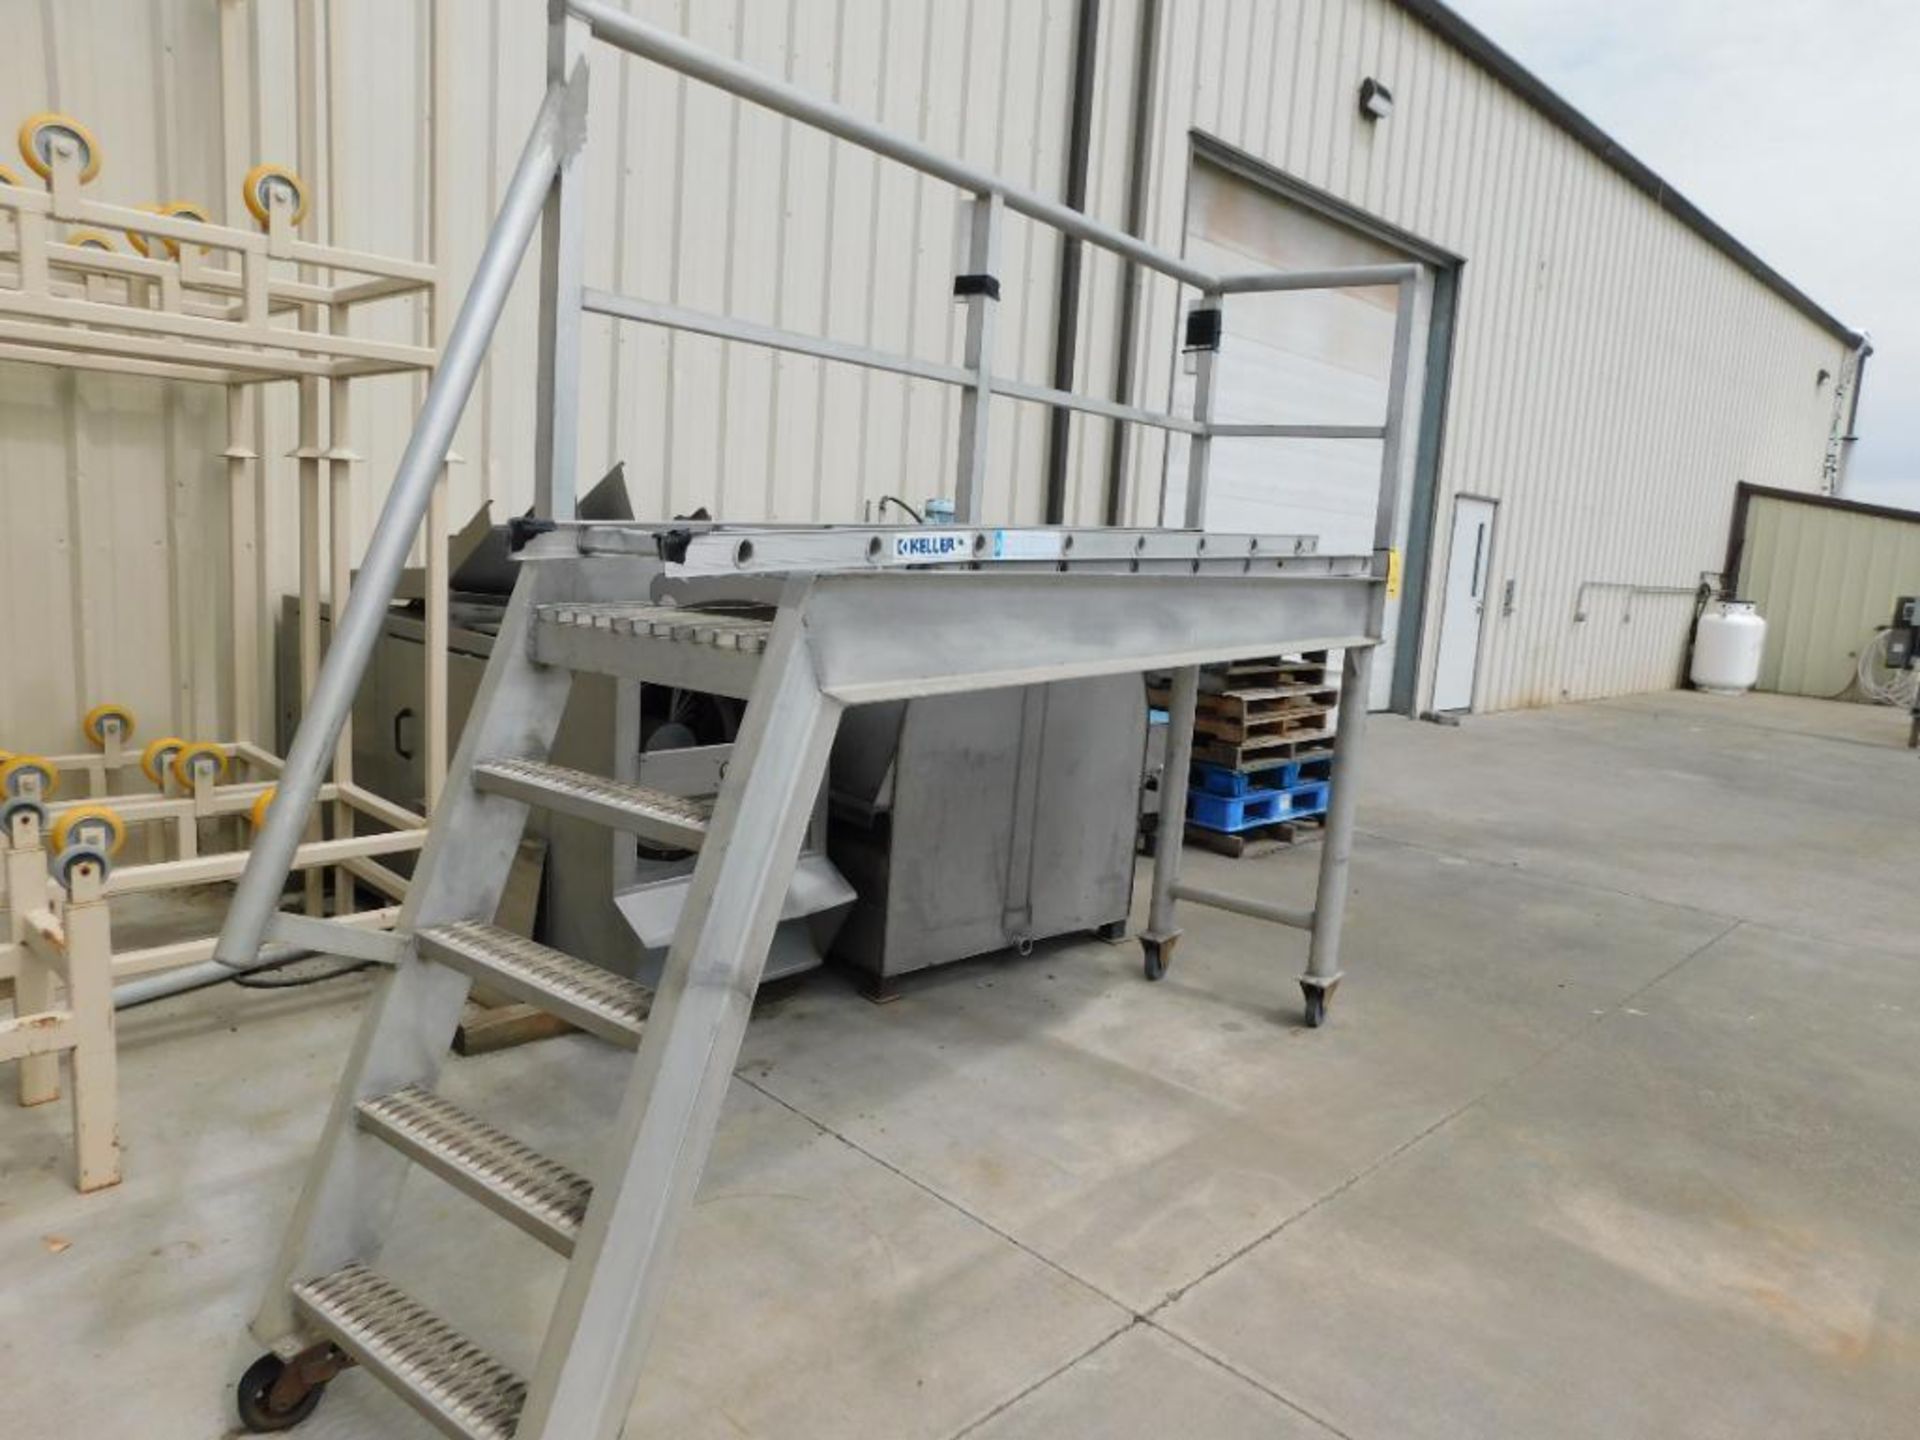 53" Platform Rolling Aluminum Catwalk (LOCATED IN WINERY) - Image 2 of 2